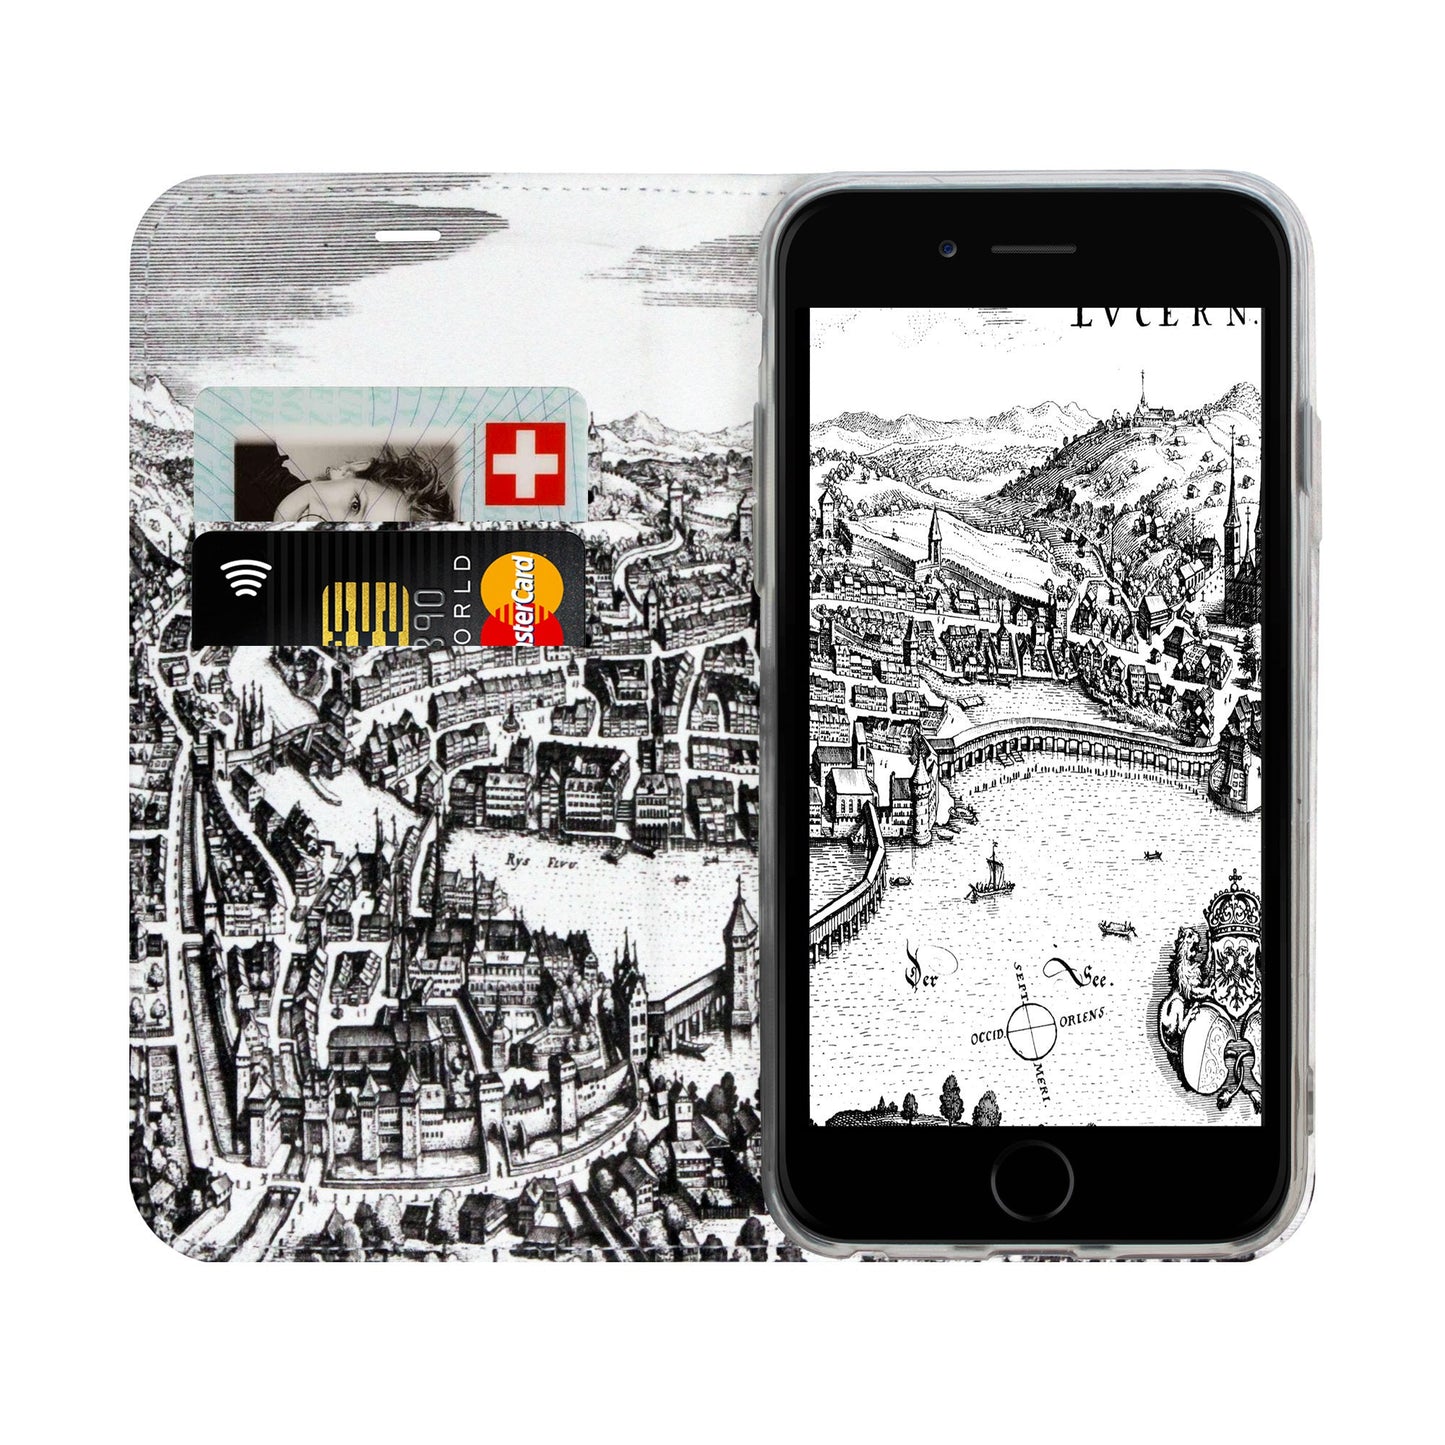 Lucerne City Panorama Case for iPhone 6/6S/7/8/SE 2/SE 3